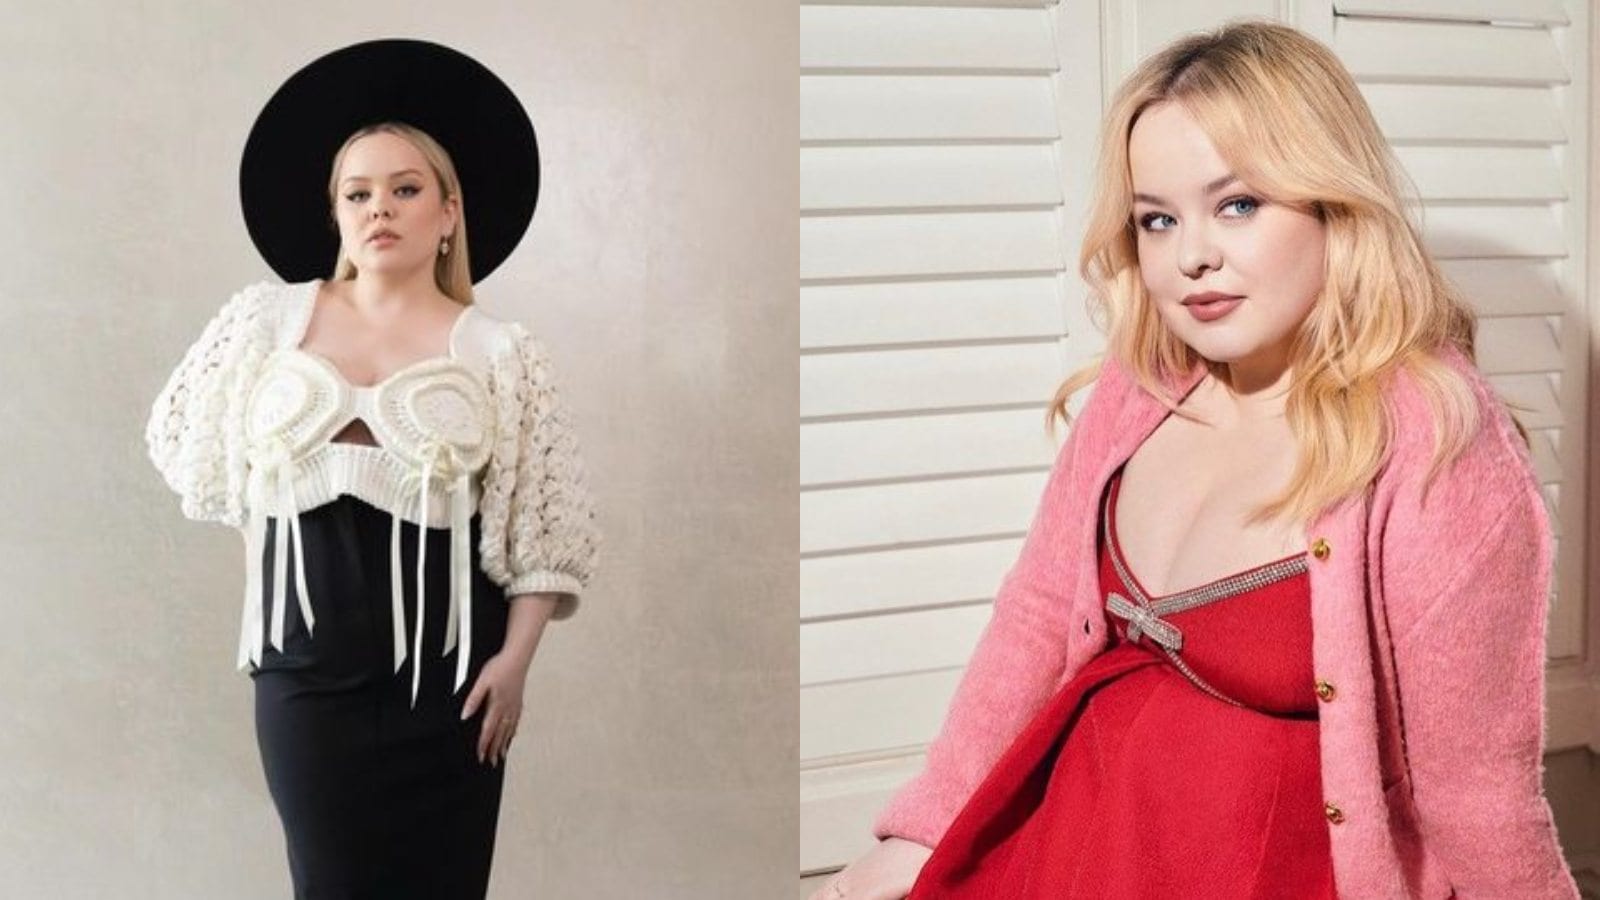 Bridgerton actress Nicola Coughlan stands up for body positivity the Lady Whistledown way!